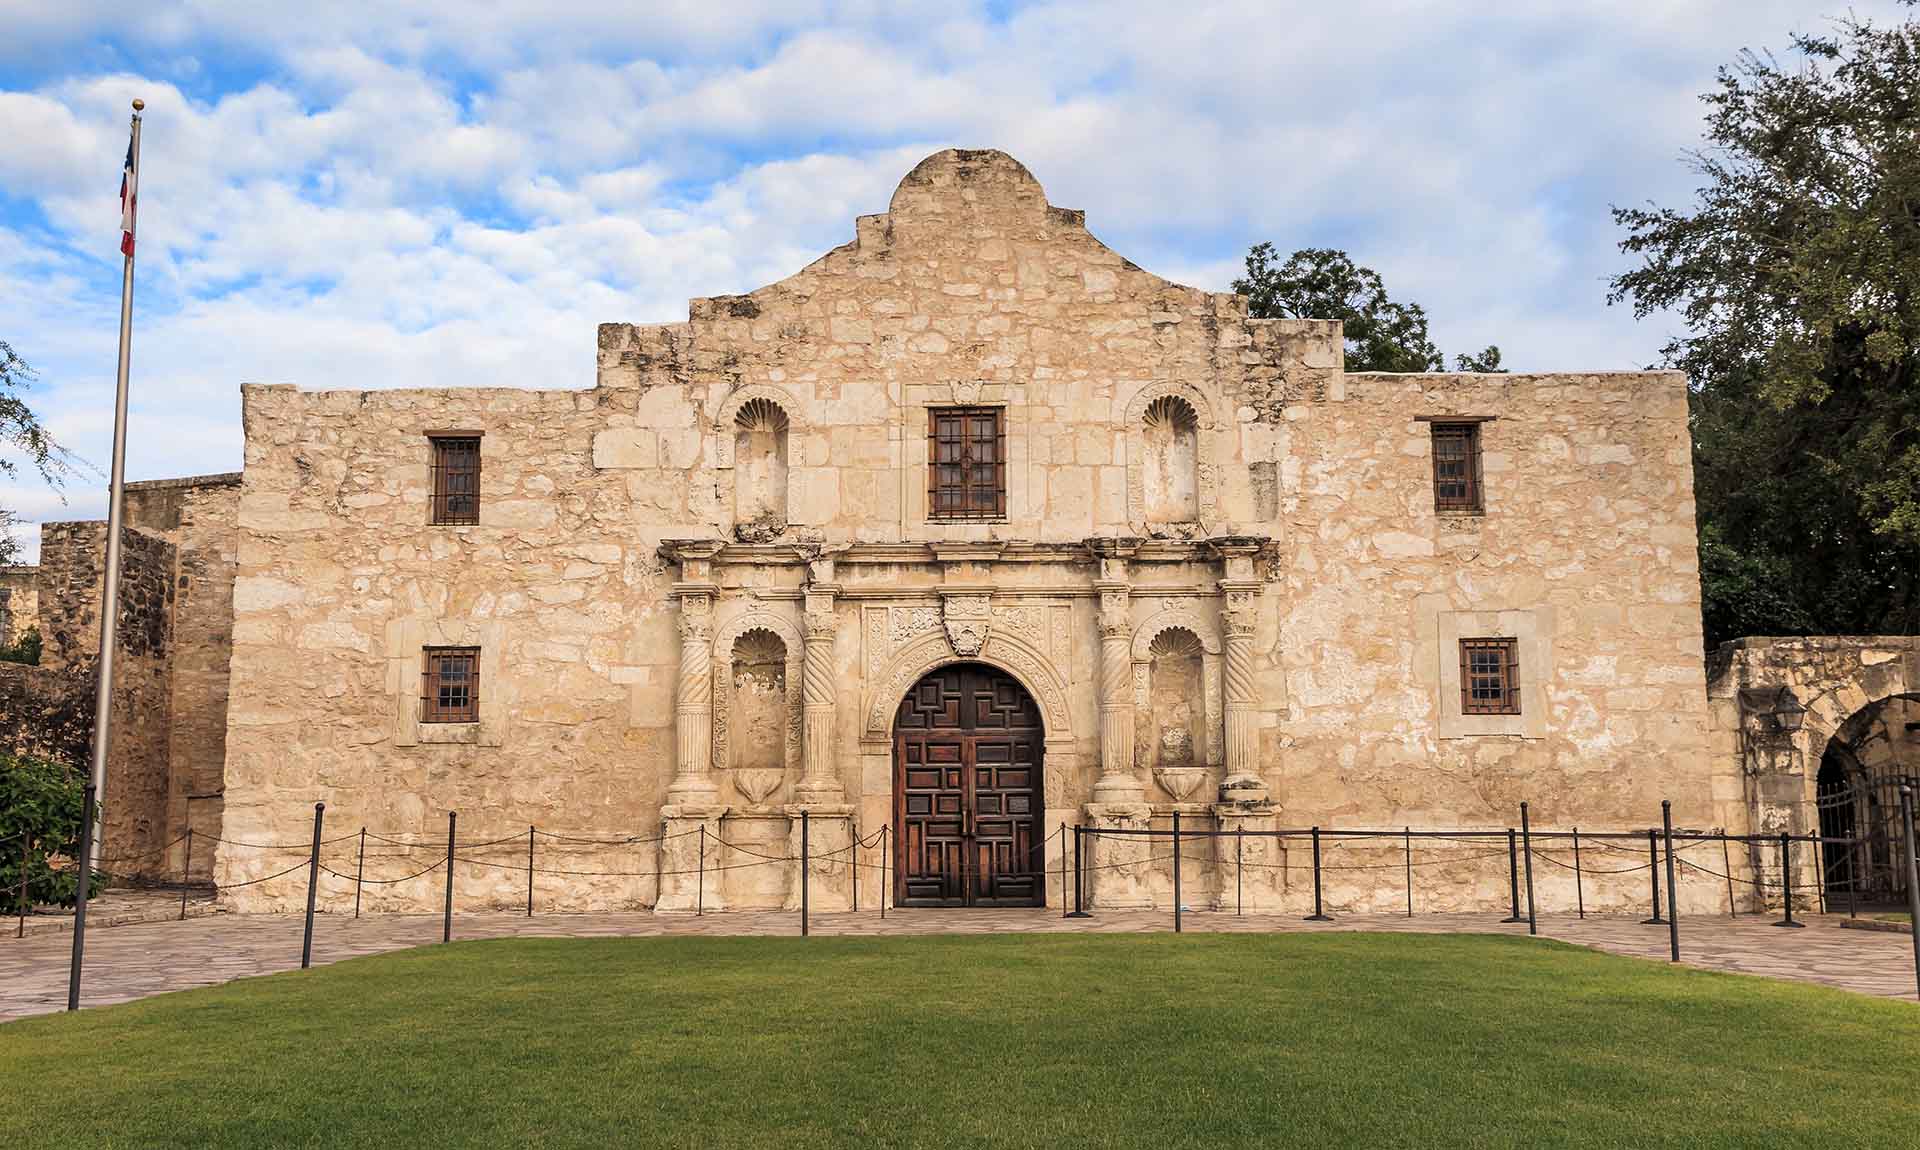 The Alamo stands as a symbol of courage and sacrifice. It serves as a reminder of the price of freedom and the spirit of those who fought for it.